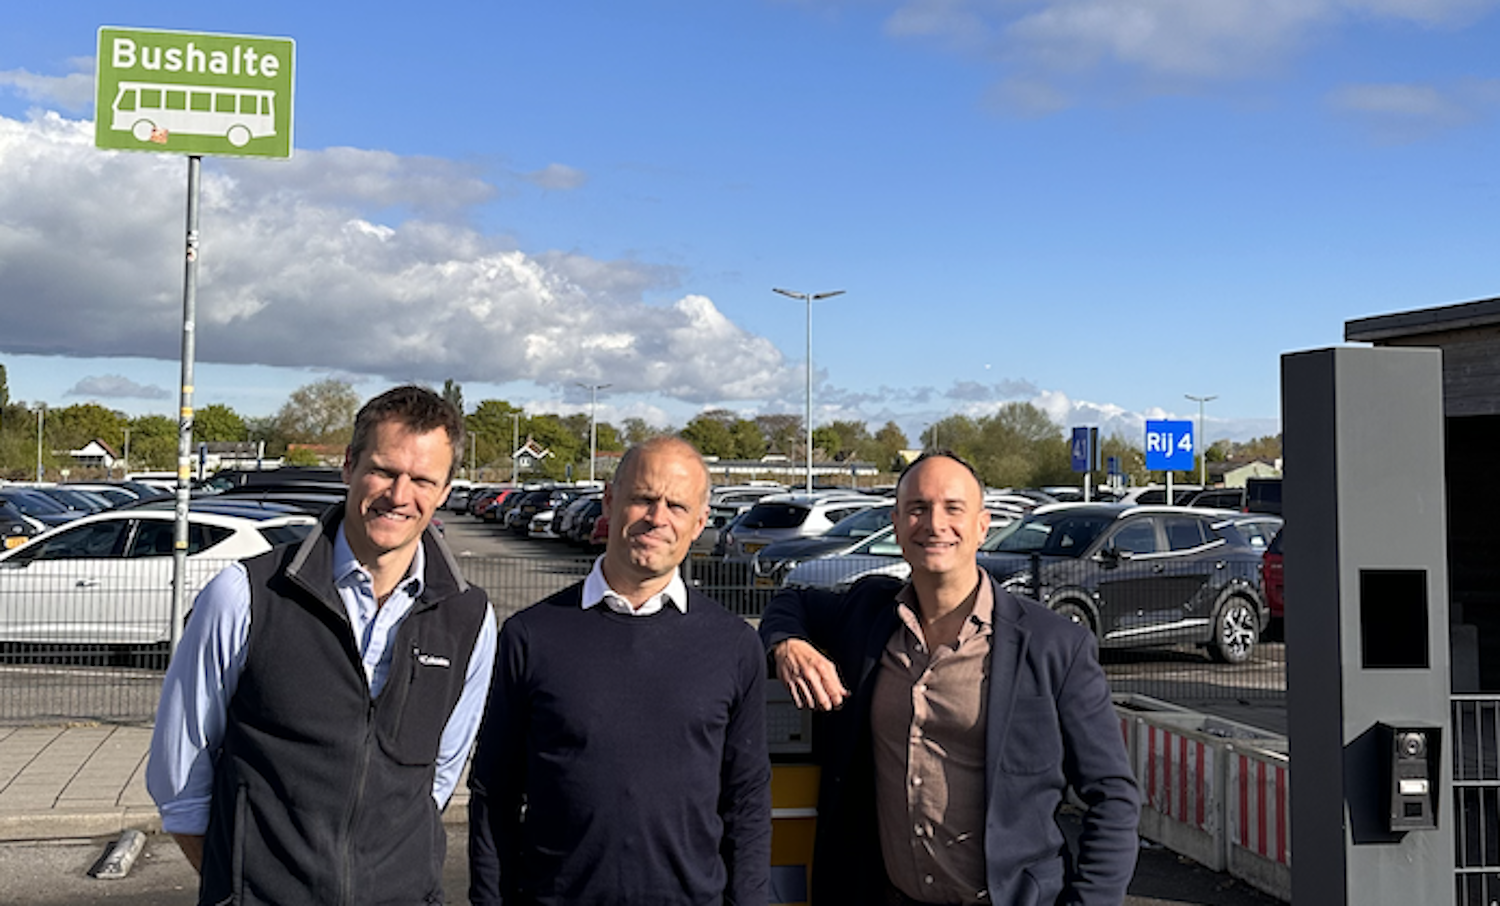 Team (from left to right) Hugo Loudon, Holiday Extras' CFO; Albert Weerman, Quick Parking's founder; and Simon Hagger, Holiday Extras' Deputy CEO